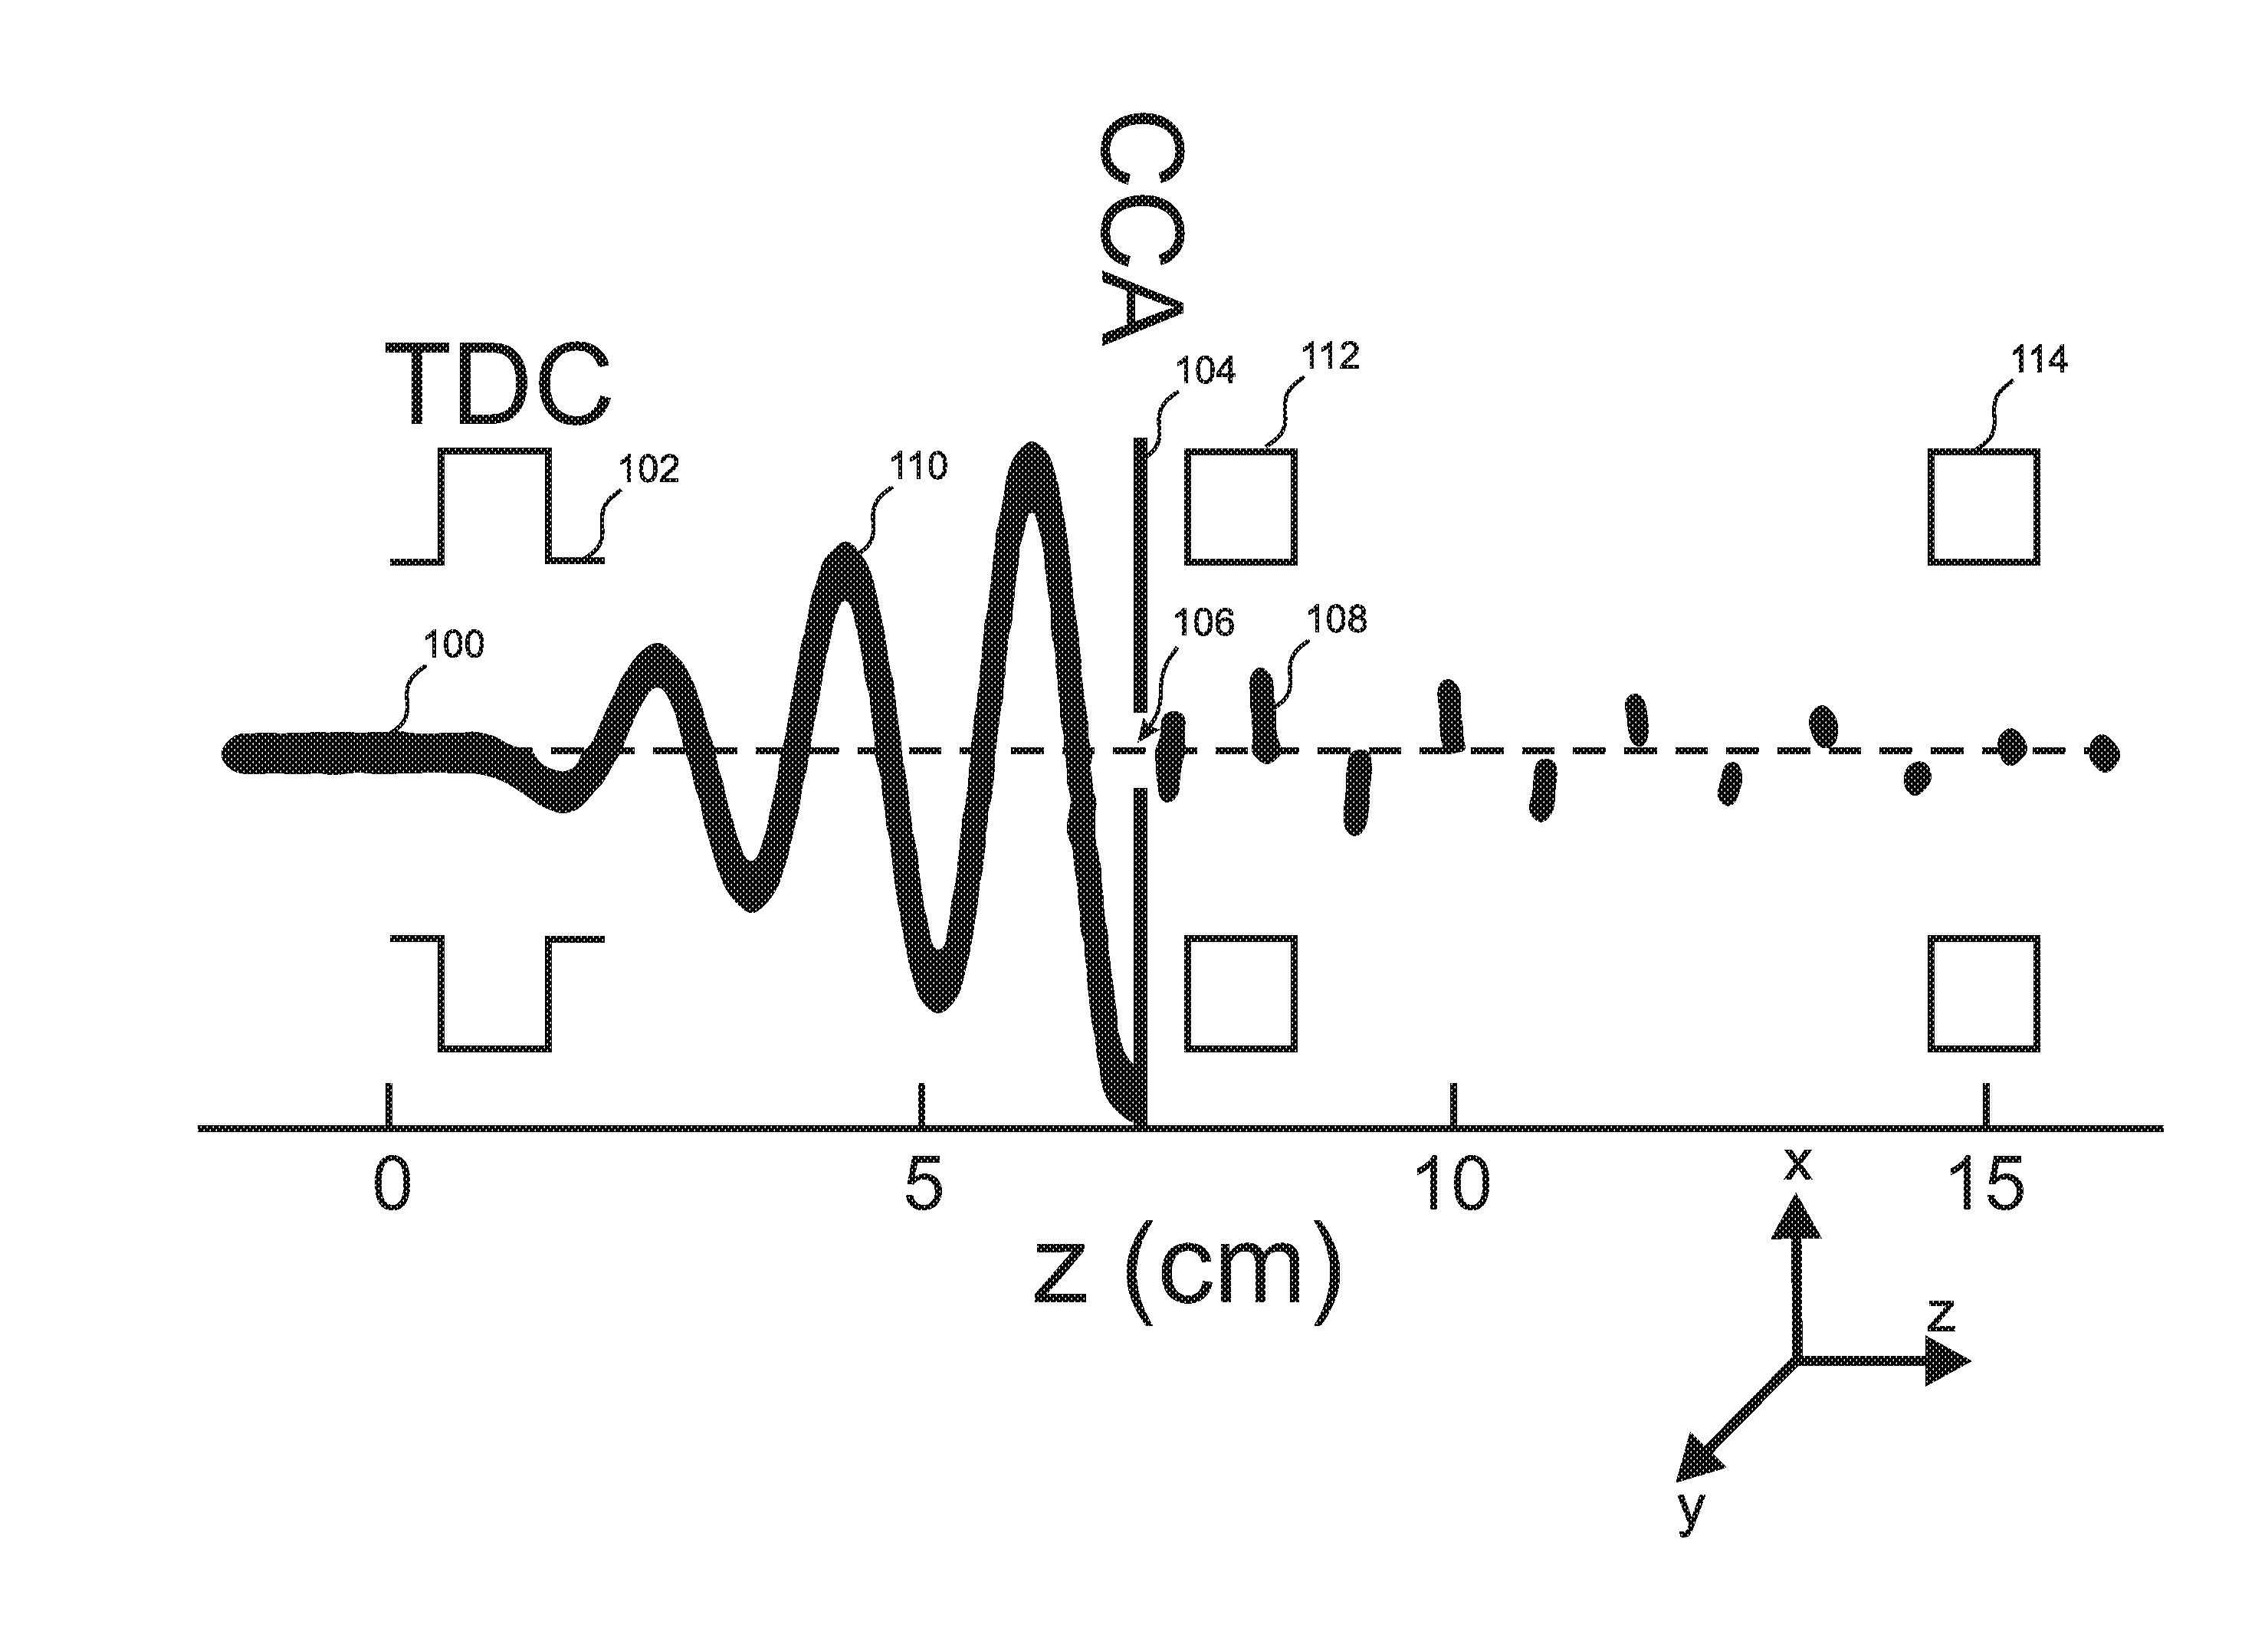 APPARATUS FOR GHz RATE HIGH DUTY CYCLE PULSING AND MANIPULATION OF LOW AND MEDIUM ENERGY DC ELECTRON BEAMS